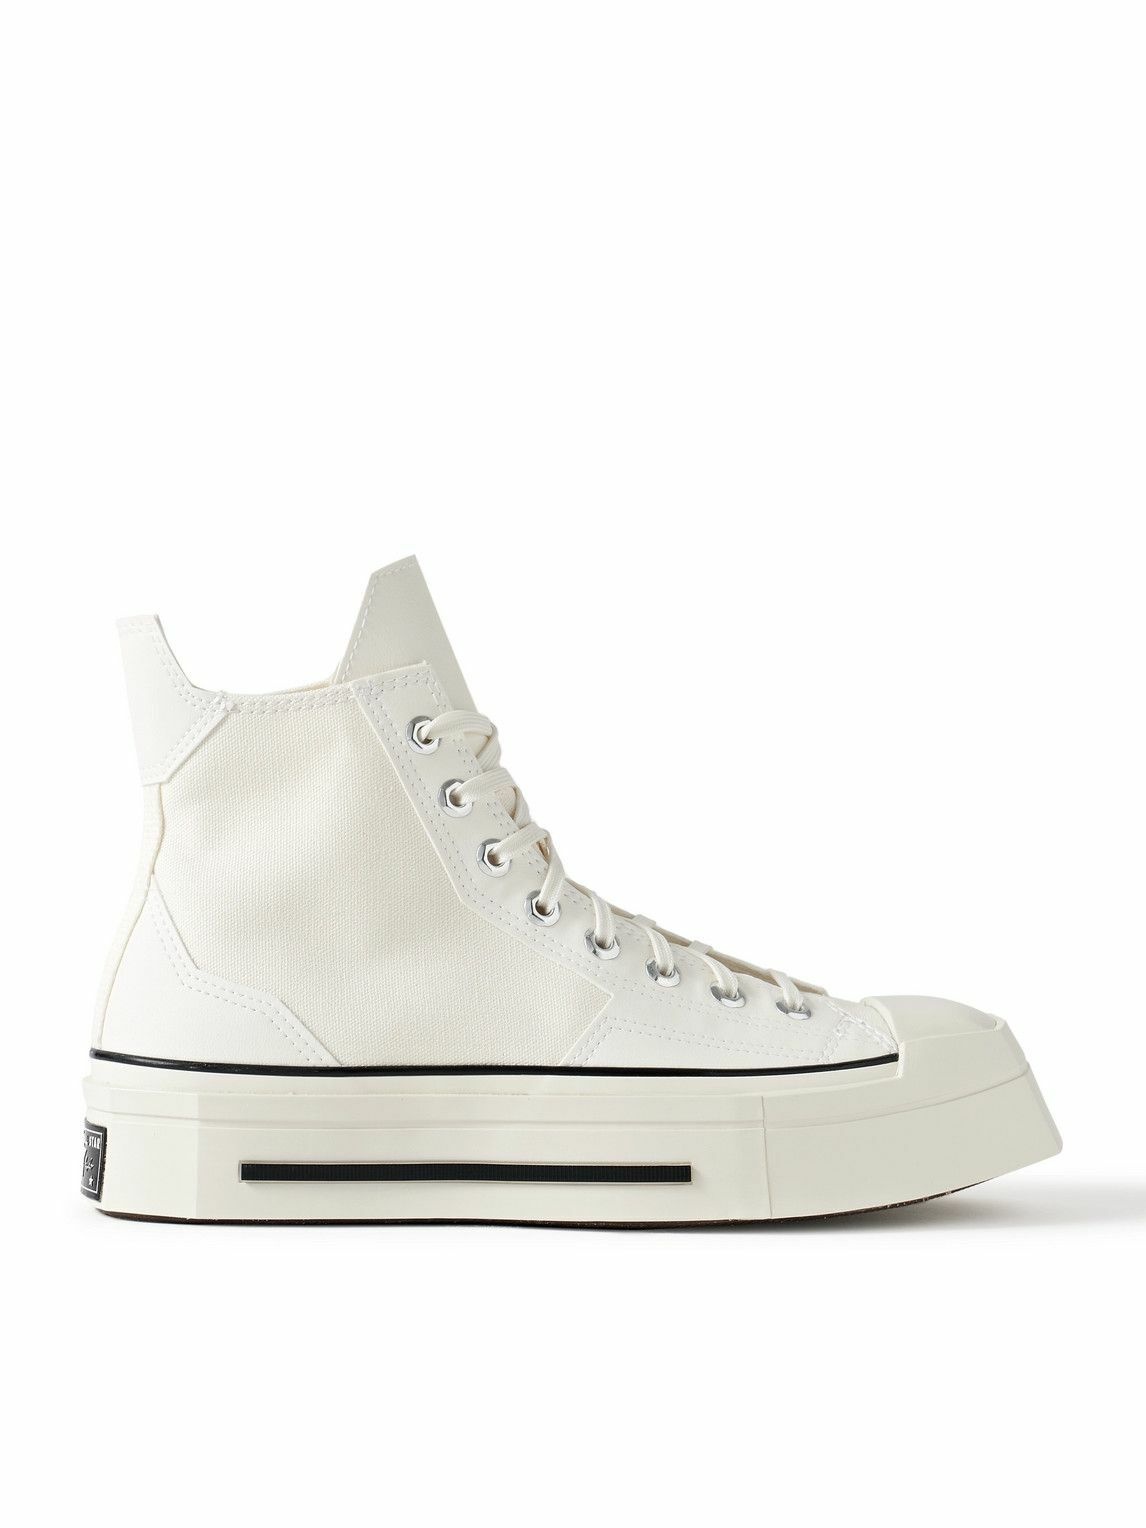 Photo: Converse - Chuck 70 De Luxe Leather and Canvas Platform High-Top Sneakers - White